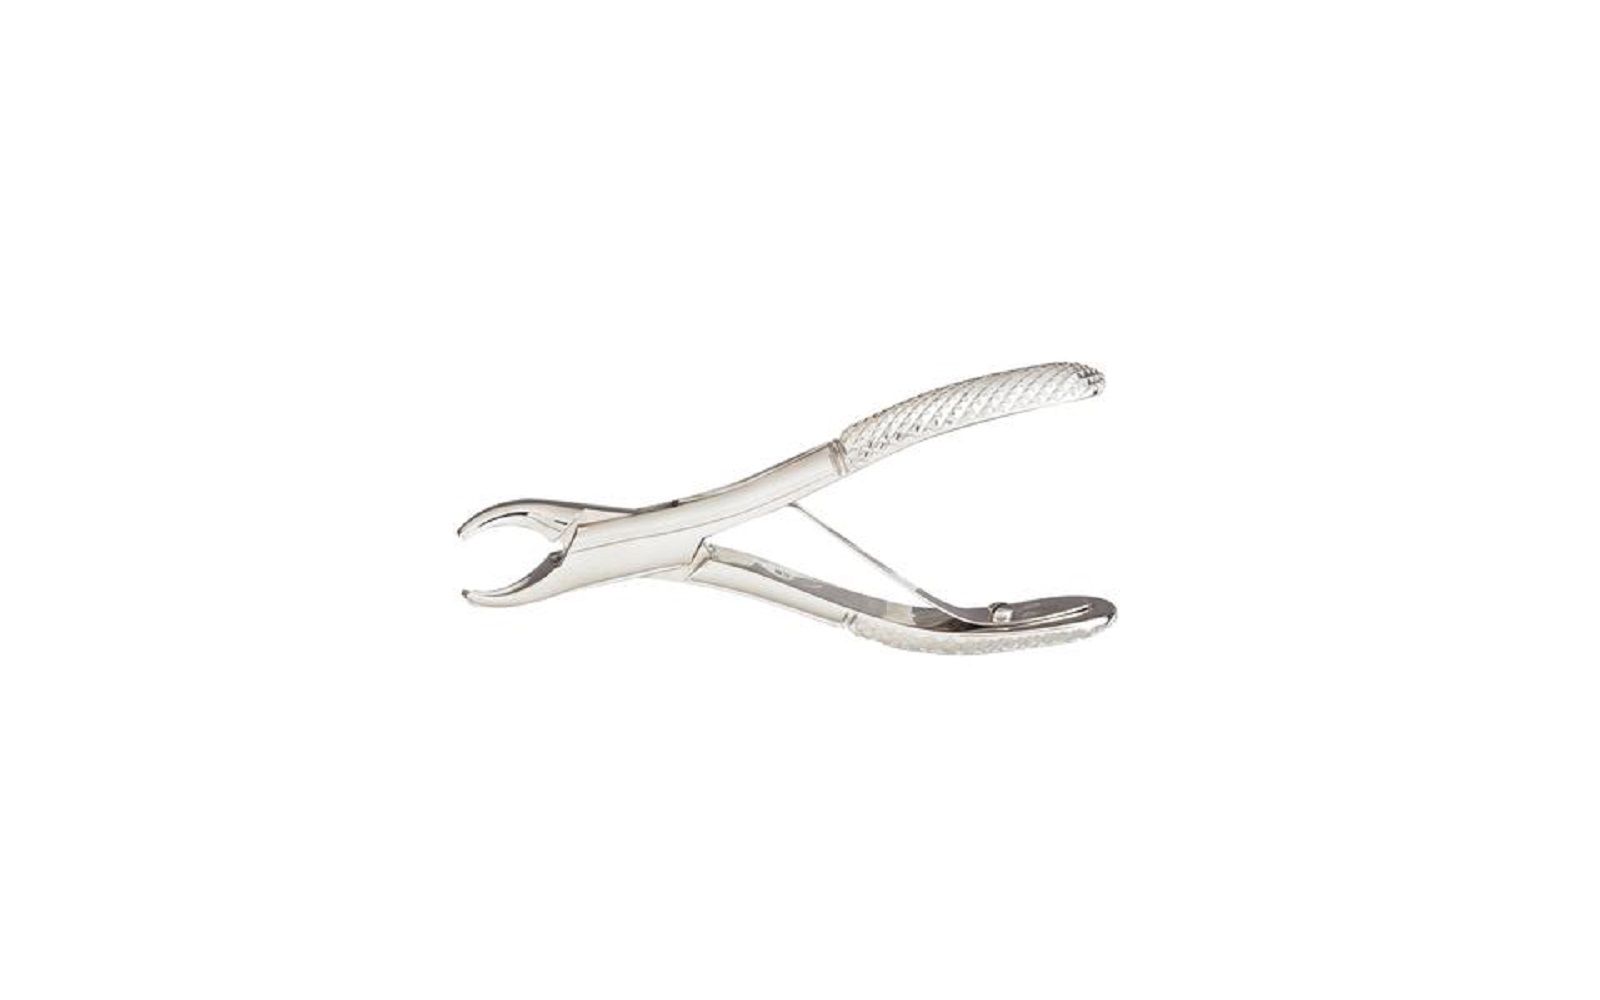 Extracting forceps – # 150 1/2s, 4-1/2", petite, universal, spring handle